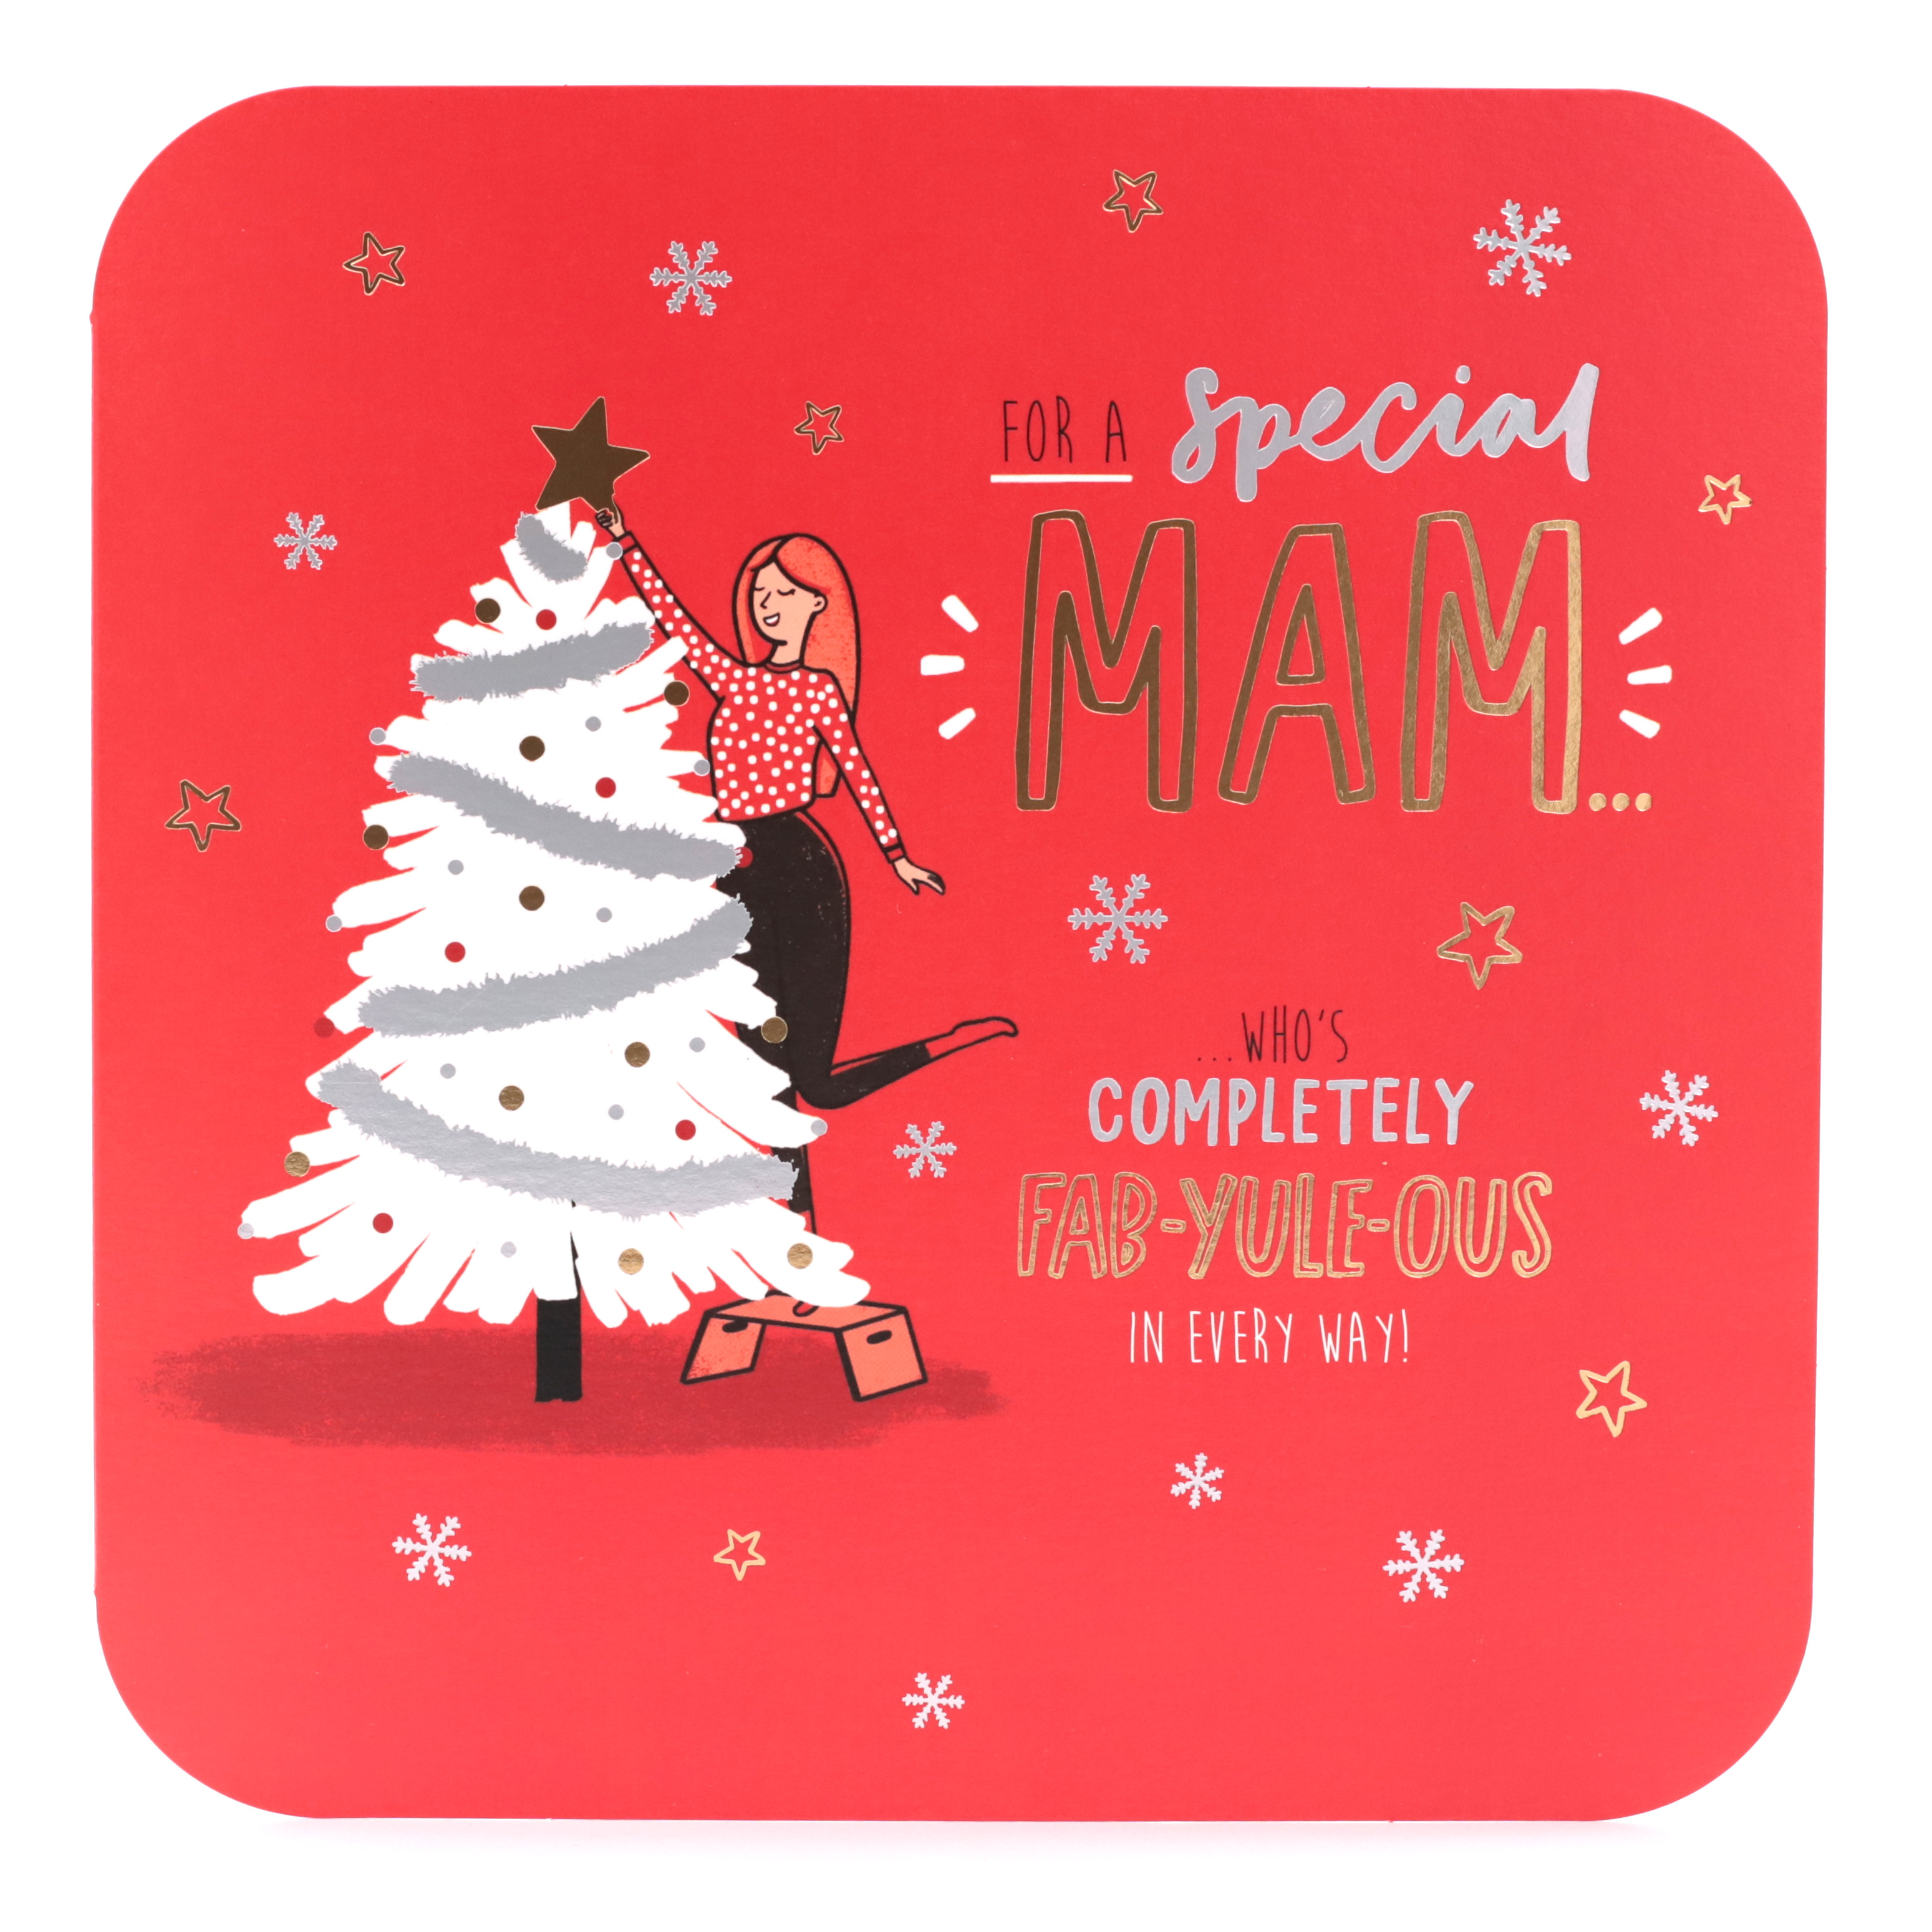 Christmas Card - Special Mam, Completely Fab-yule-ous!